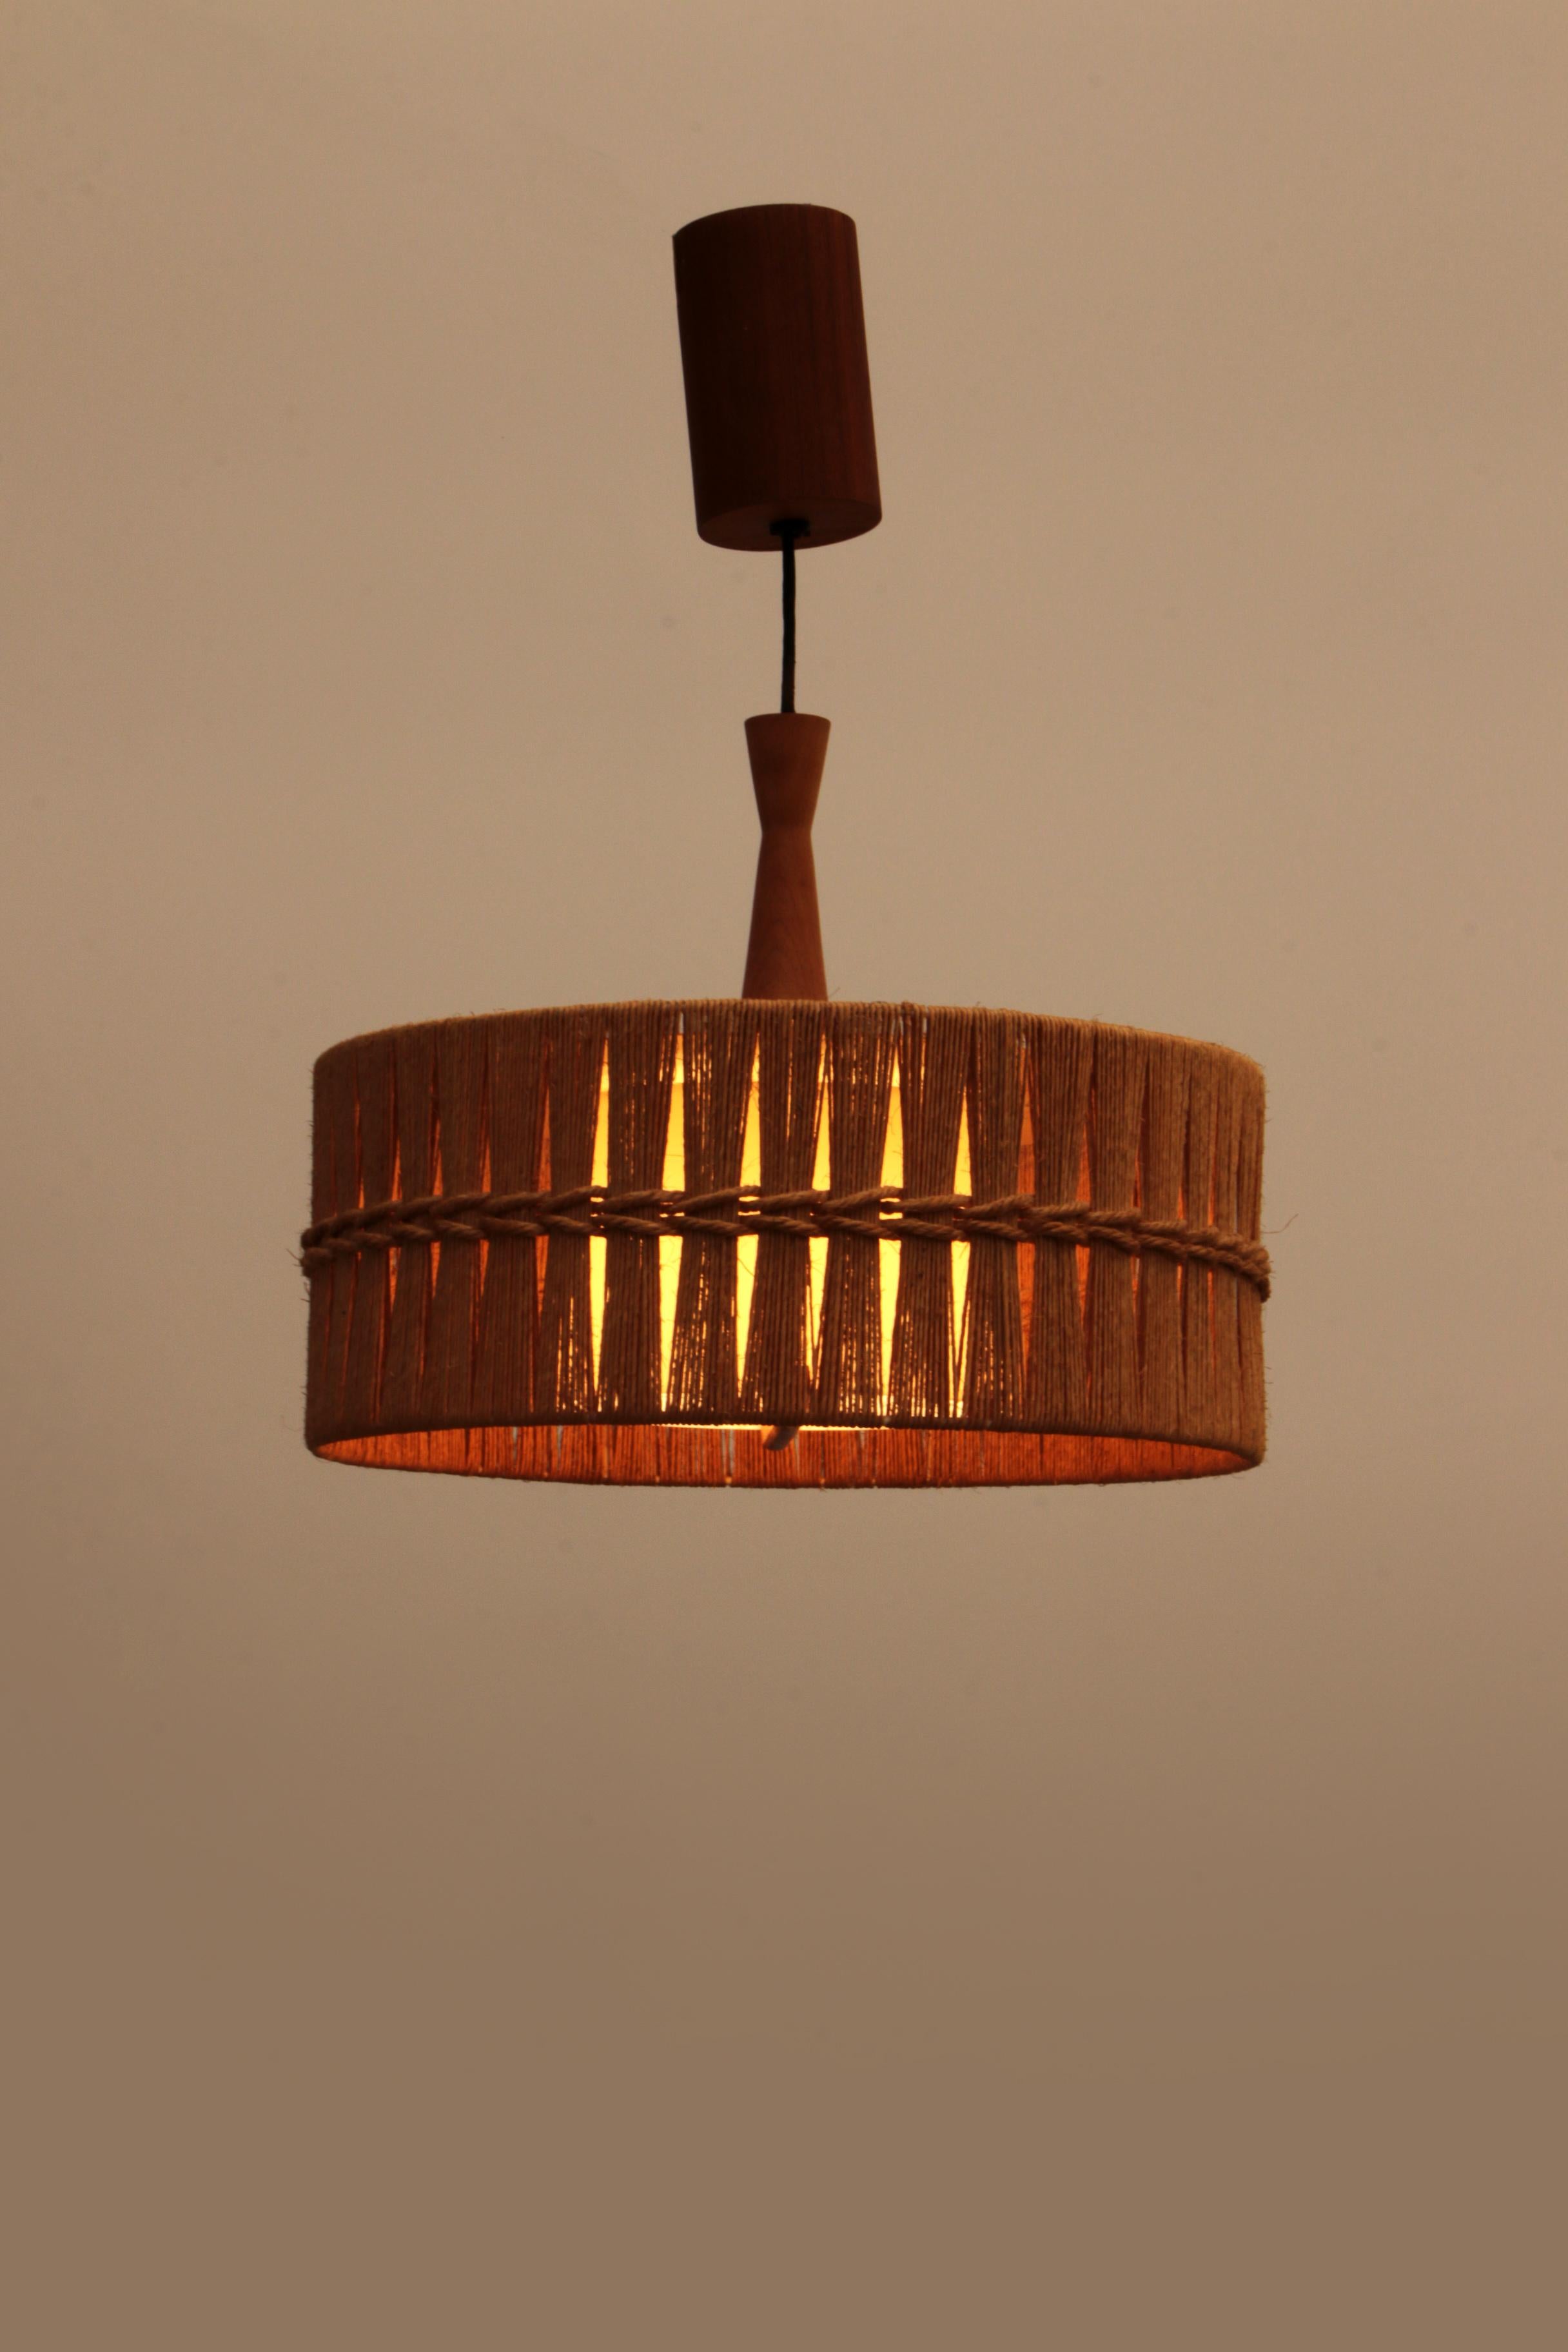 Mid-20th Century Vintage Temde Hanging Lamp with Teak and Raffia 1960s Germany For Sale